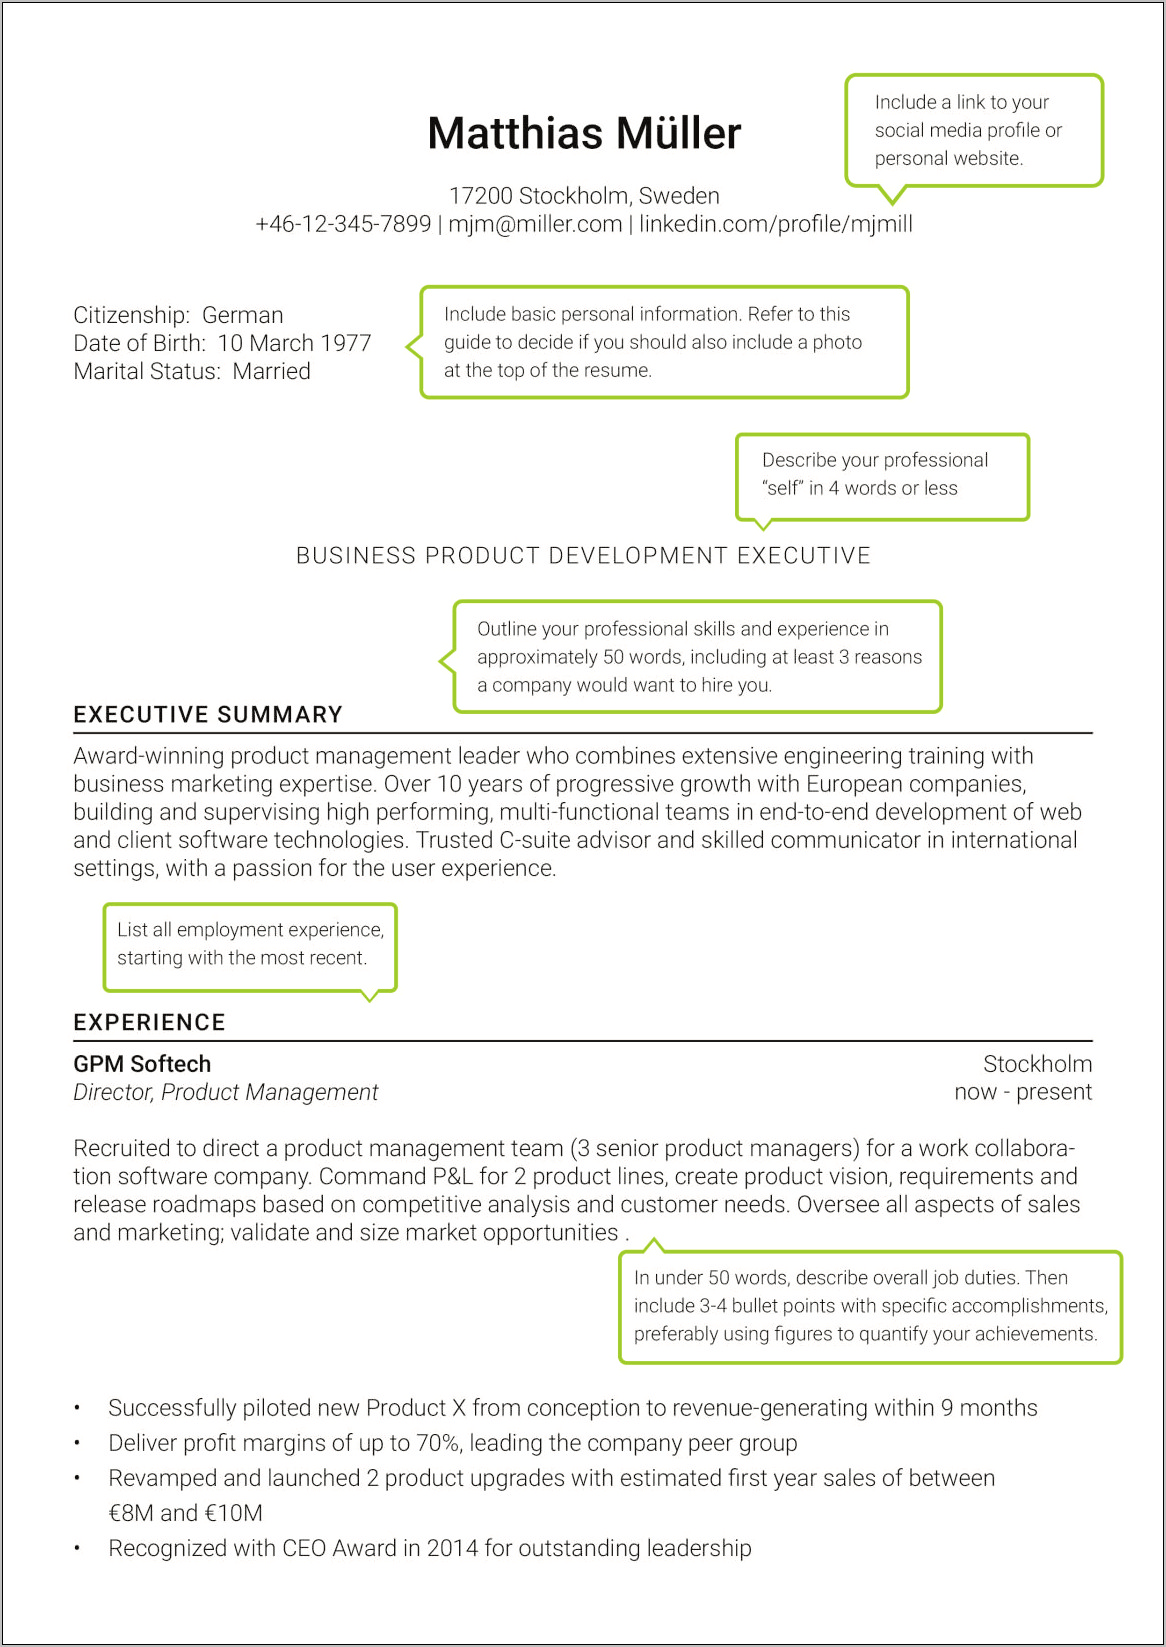 Resume Describing Experience Working With Executives